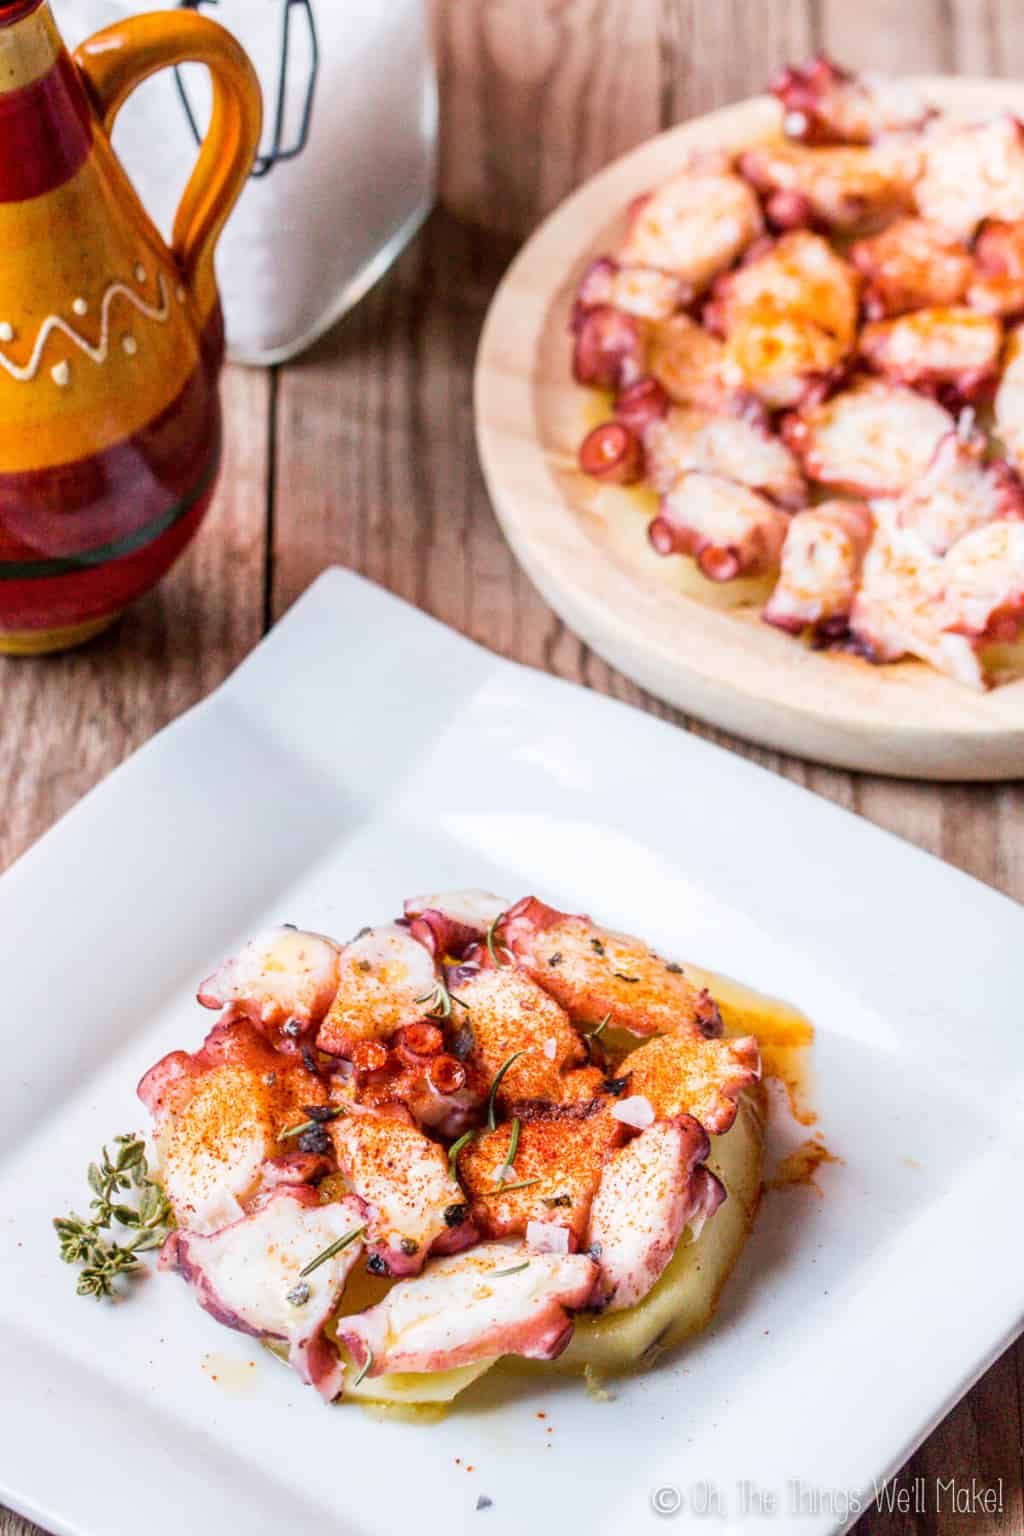 A white square plate with pulpo a la gallega, galician style octopus on top of slices of potato, garnished with paprika on it. On top is a circle plate full of pulpo a la gallega.